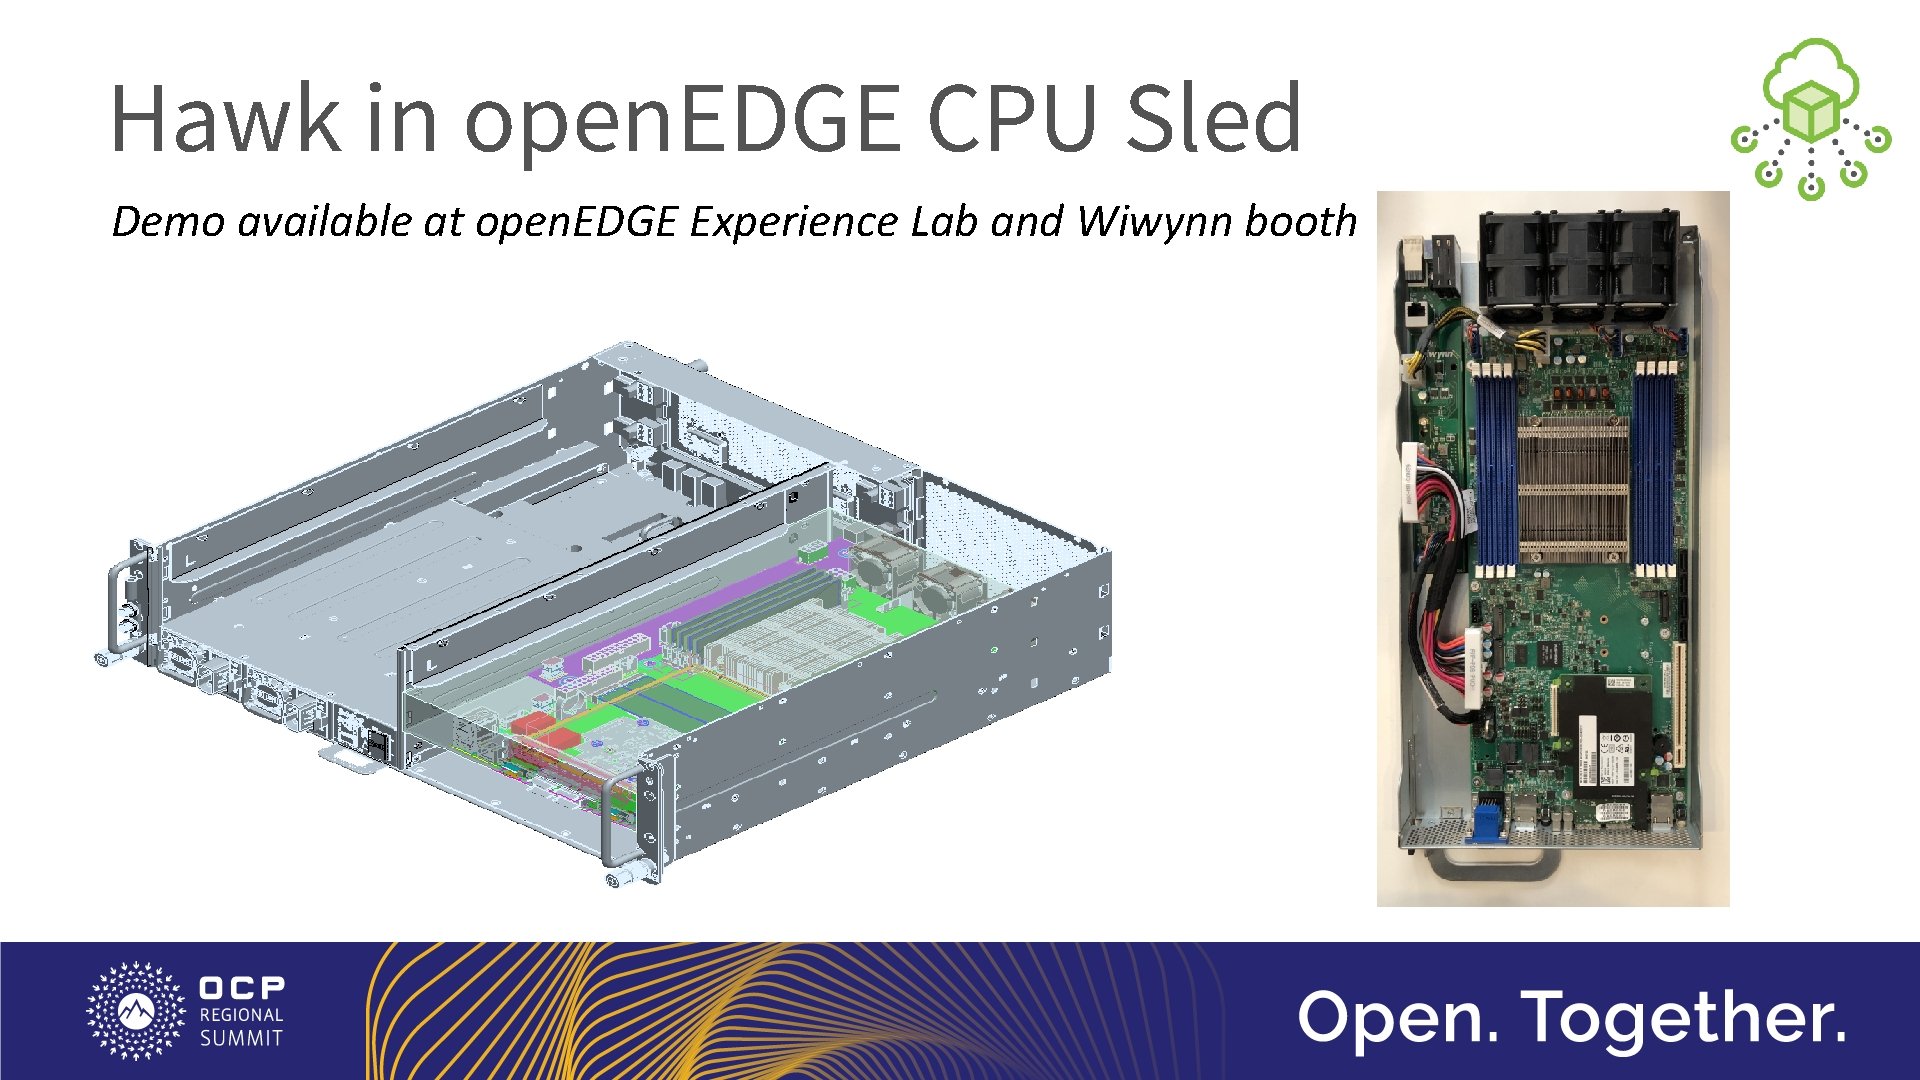 Hawk in open. EDGE CPU Sled Demo available at open. EDGE Experience Lab and